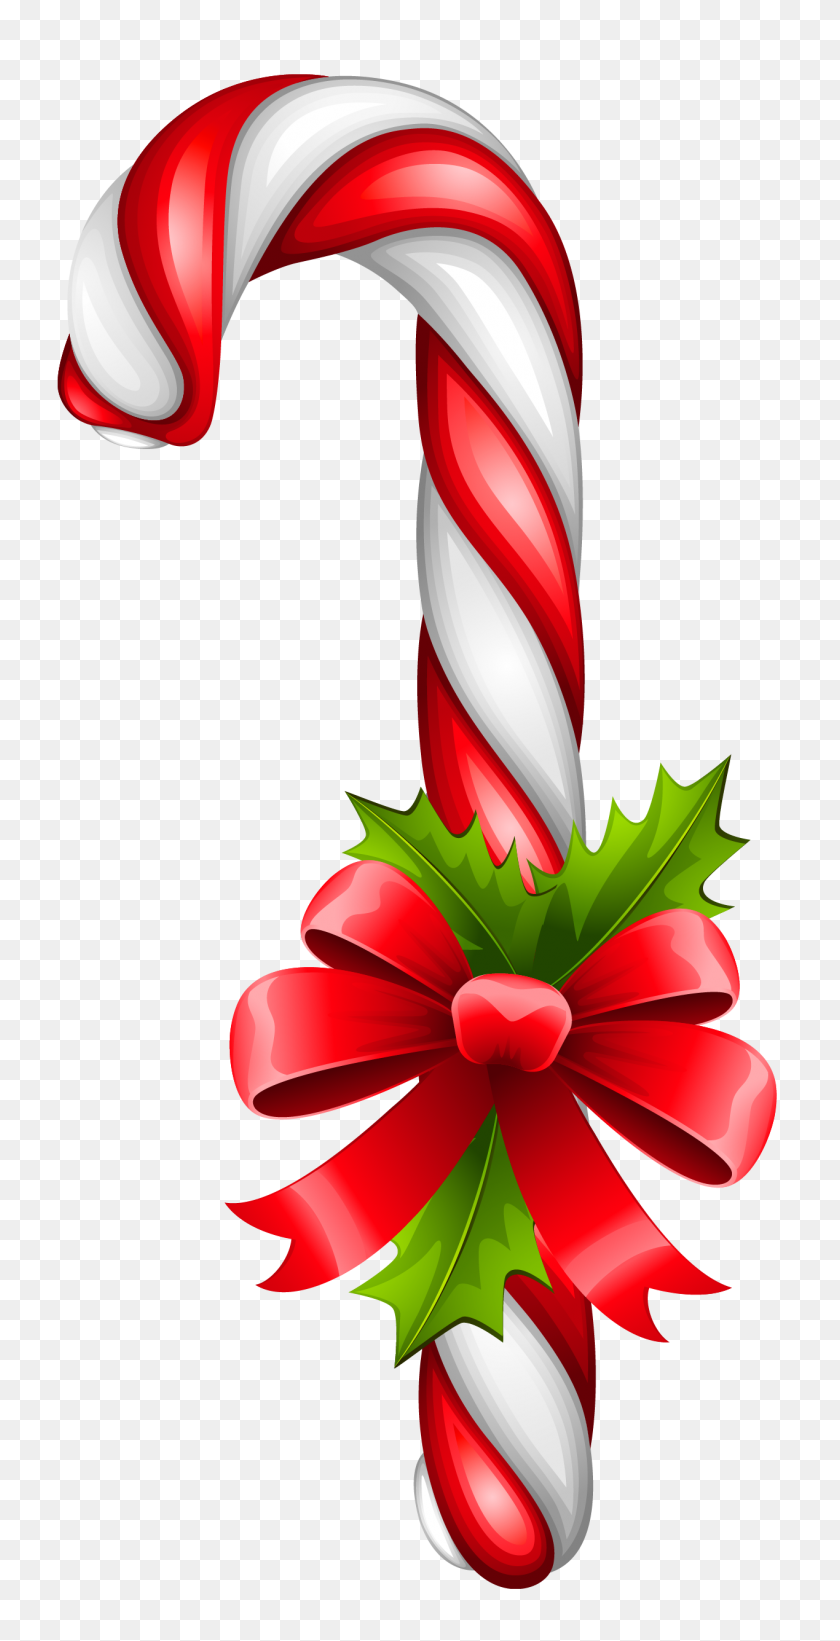 1269x2573 Merry Christmas Clipart High Resolution Pencil And In Color Merry - Candy Cane Clipart